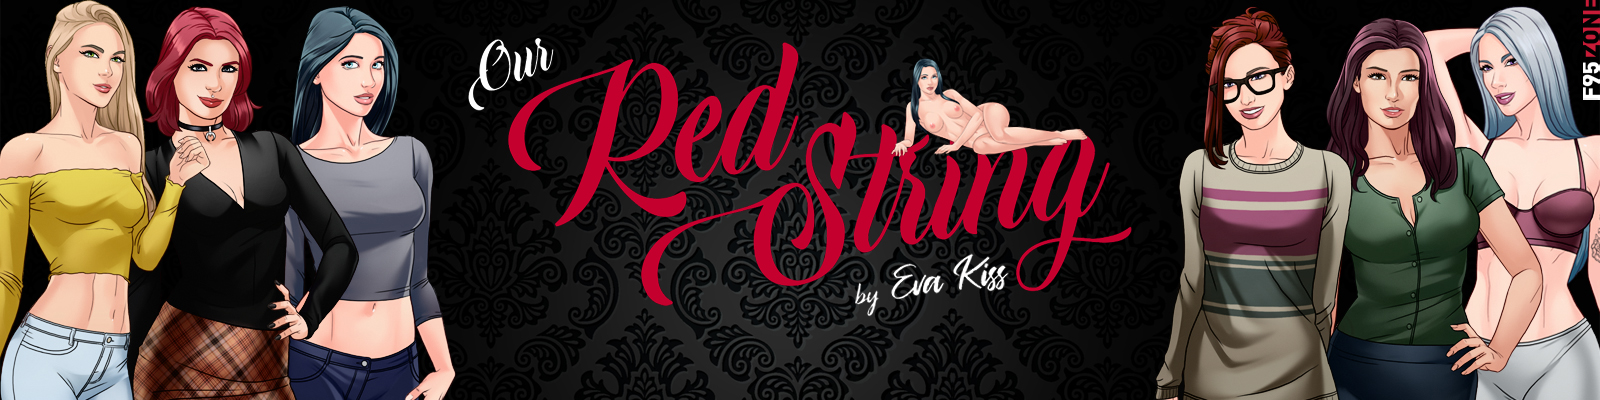 Our Red String poster